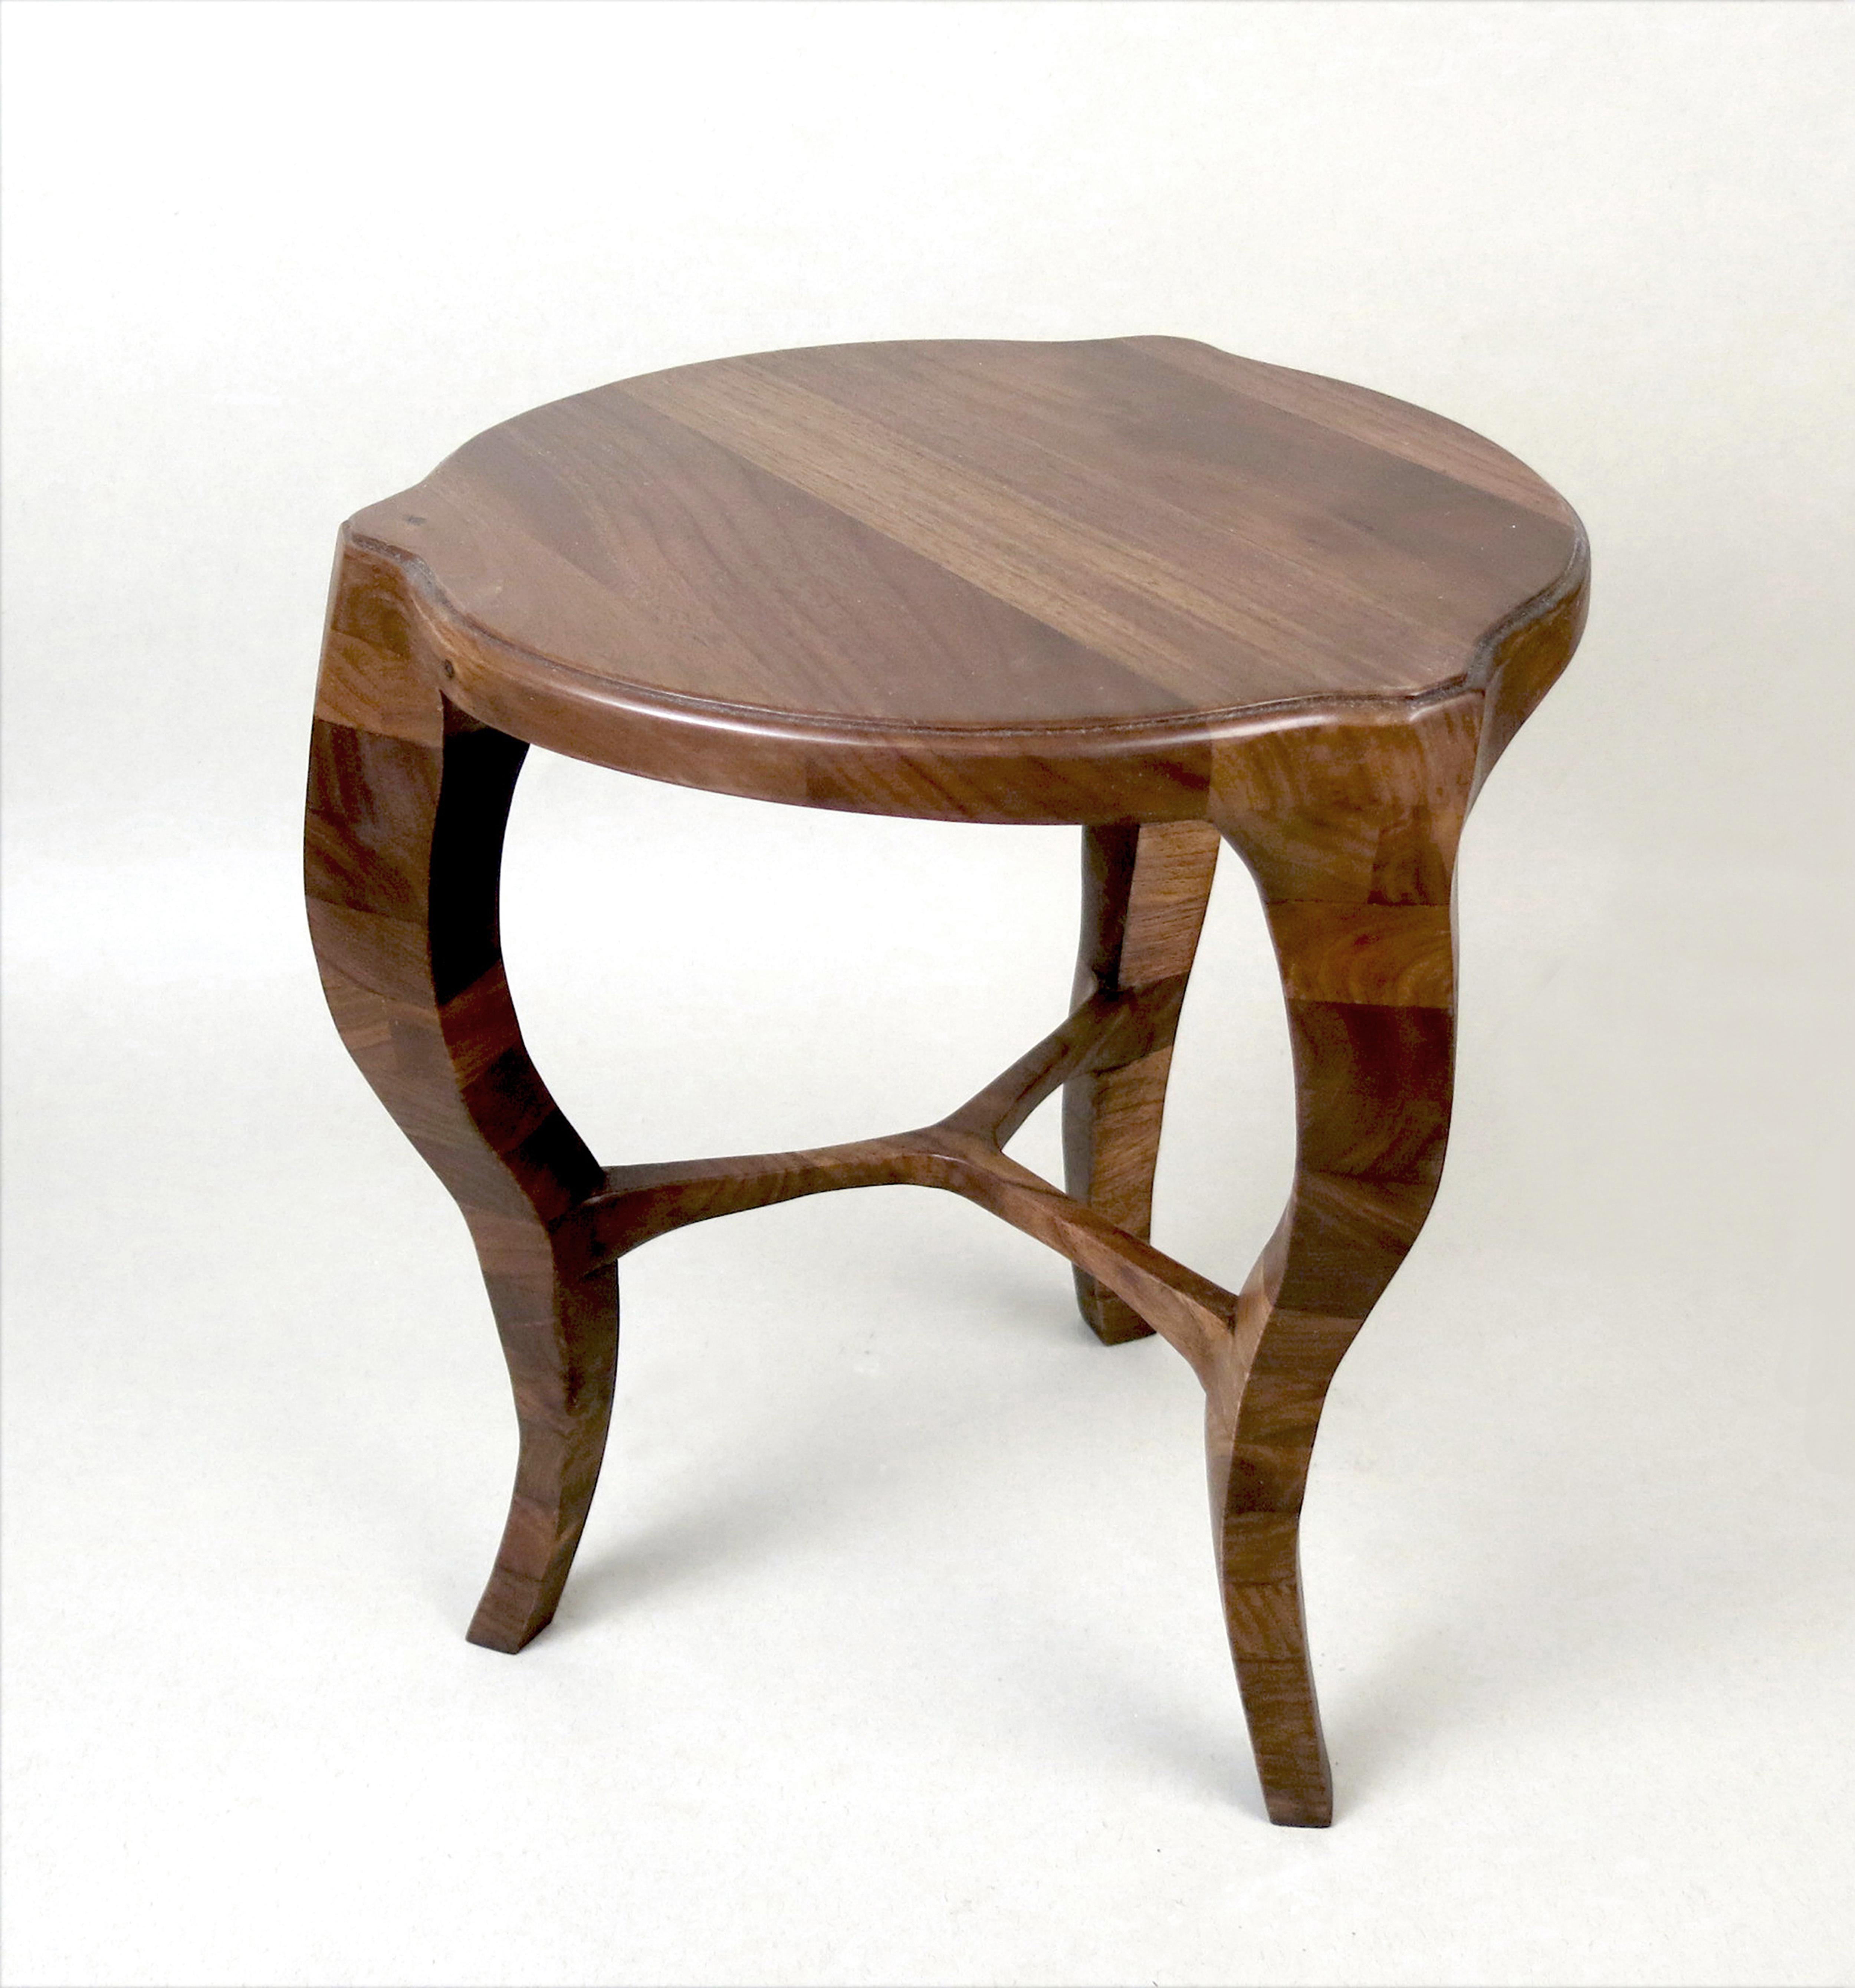 LXV side table by Aaron Scott
Dimensions: D 32 x W 32 x H 36 cm
Materials: Walnut.
Also available in other woods: bleached cherry. 


Brooklyn-based designer Aaron Scott was raised in the mountains and forests of Southwest Oregon. He studied